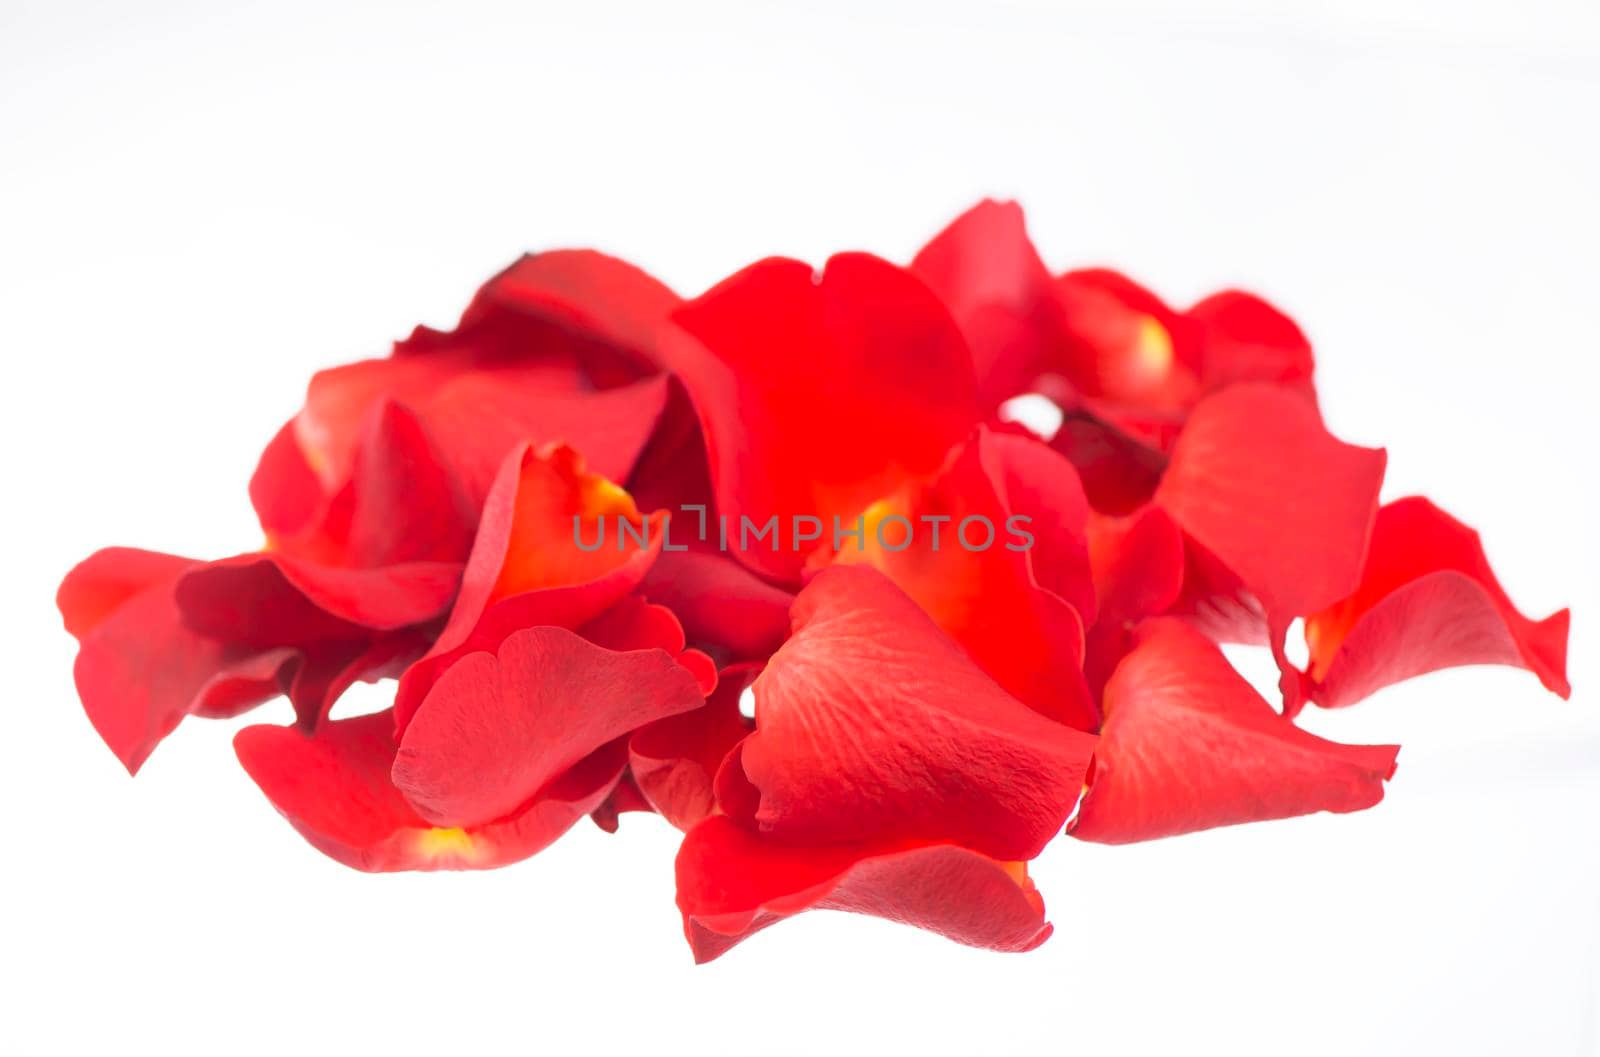 Red rose petals isolated over the white background by aprilphoto